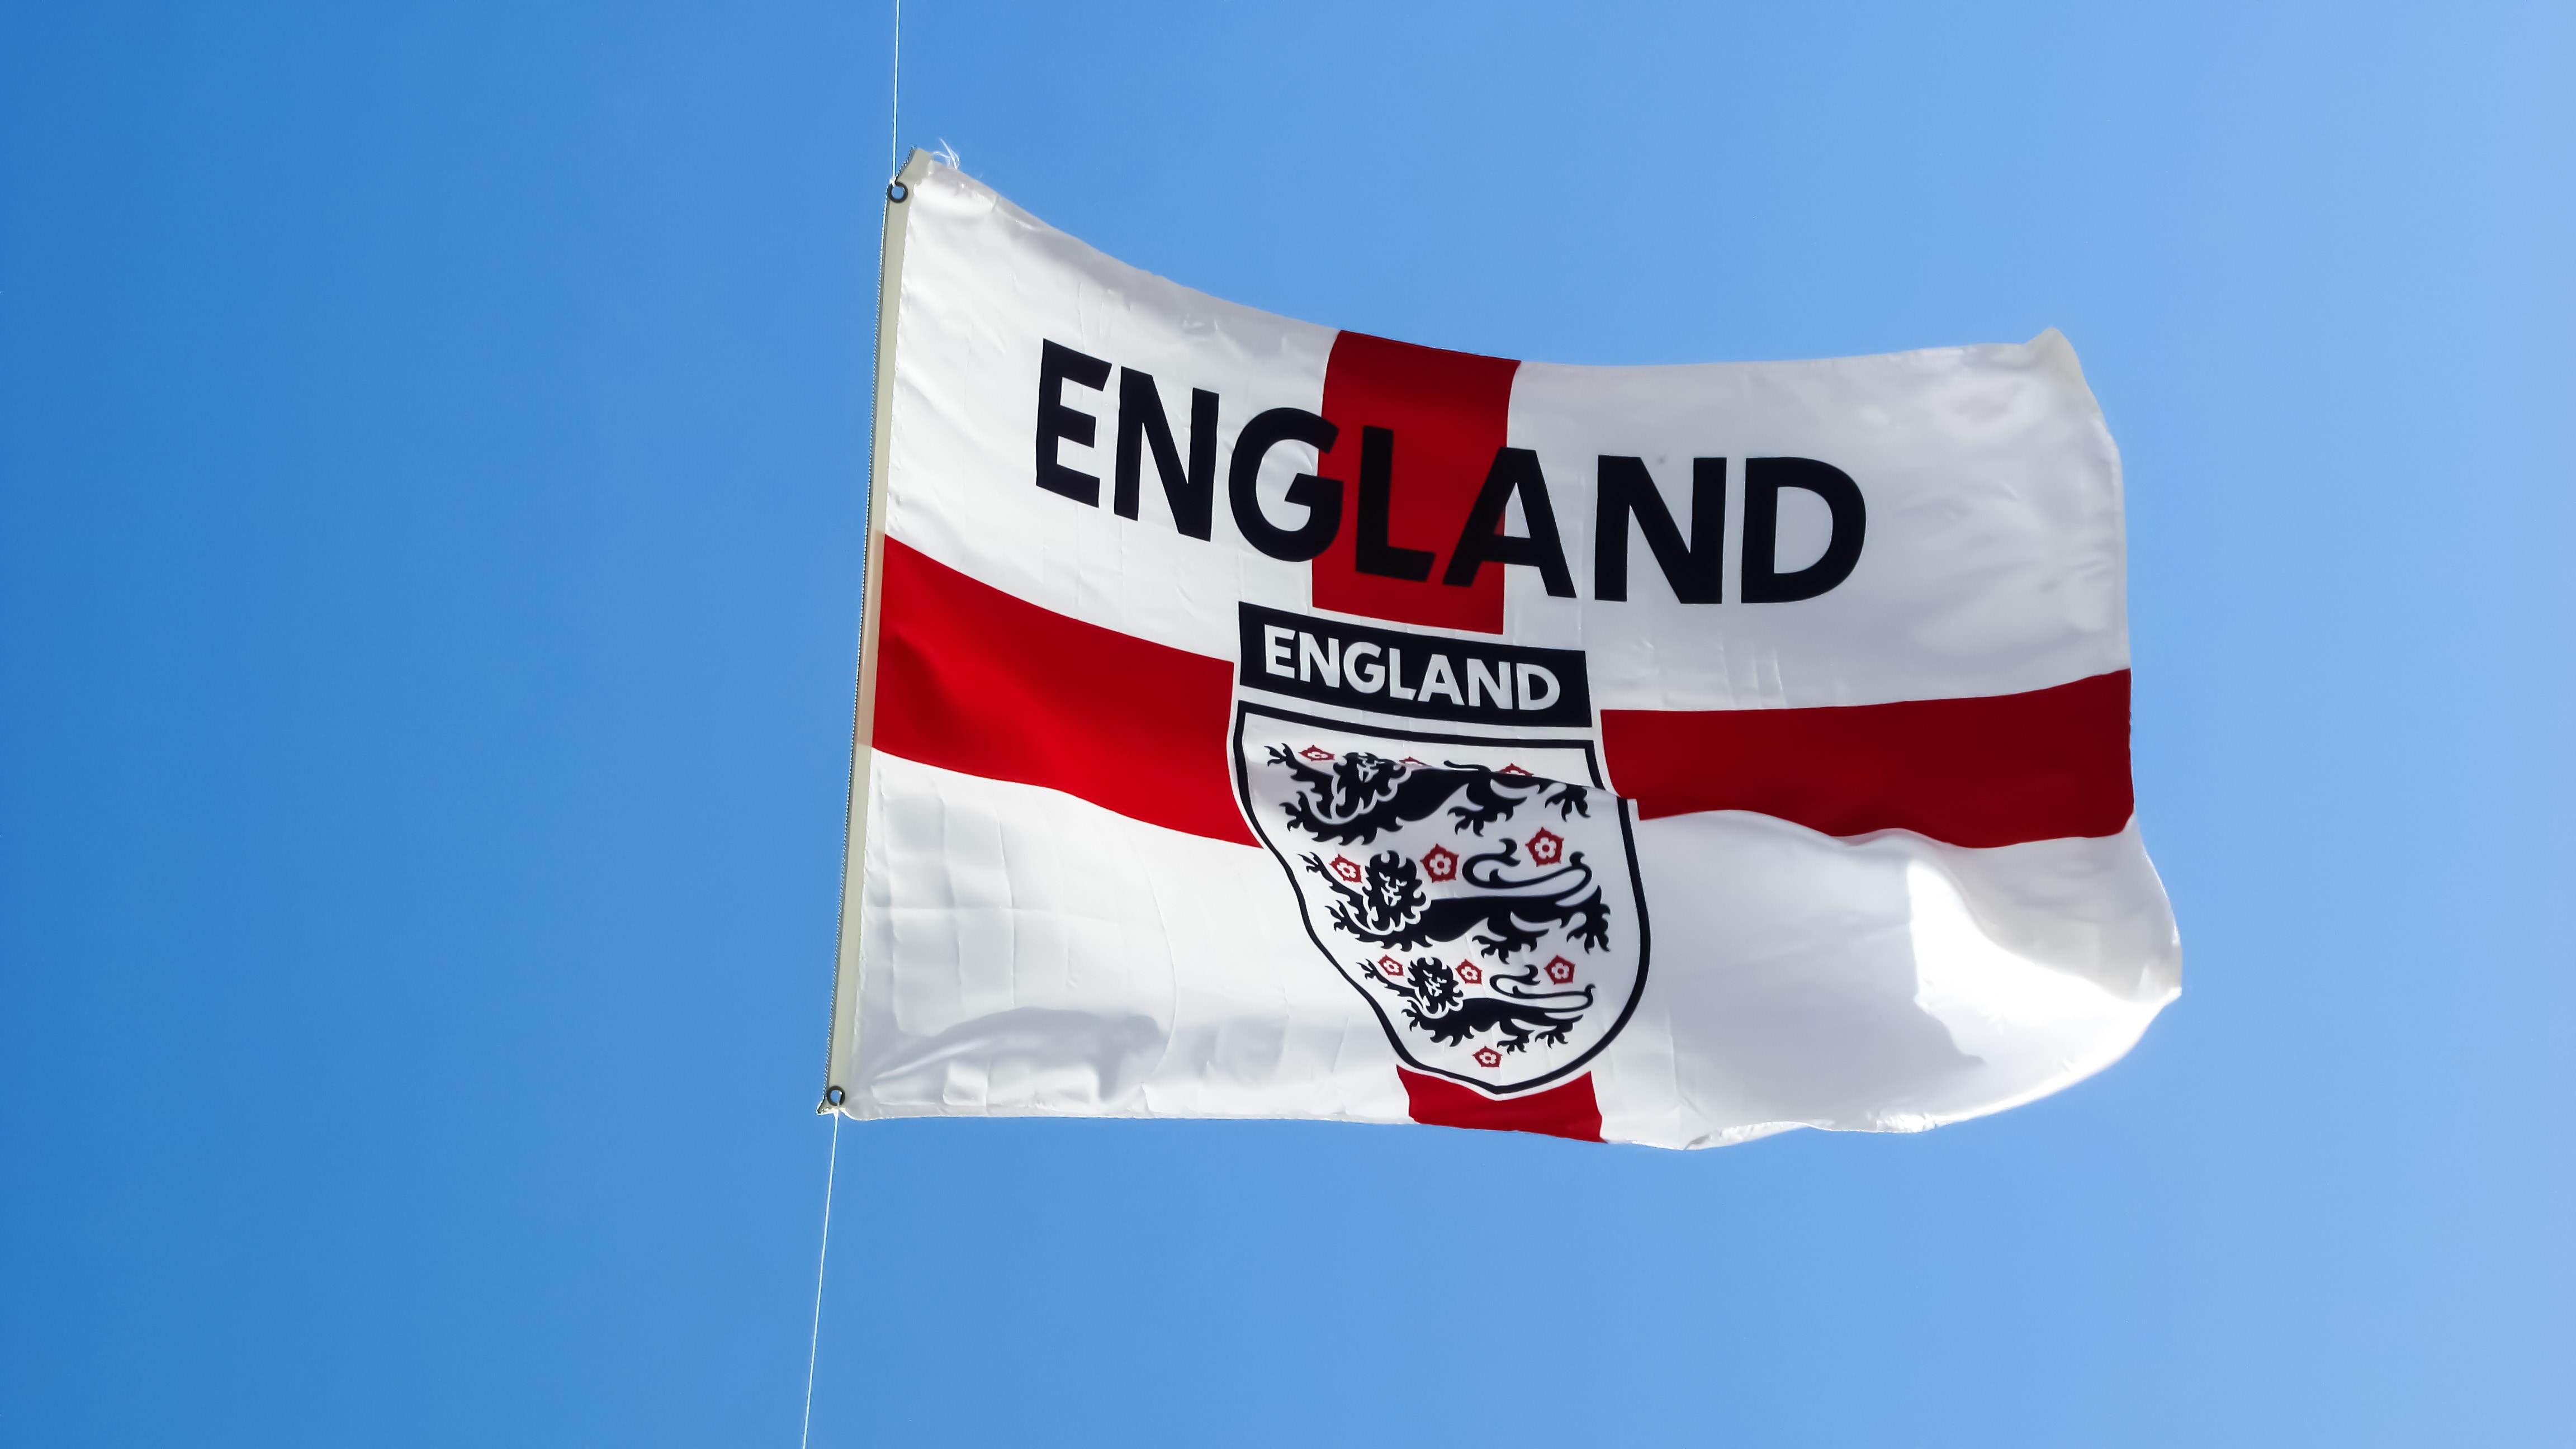 White and red England flag during day time